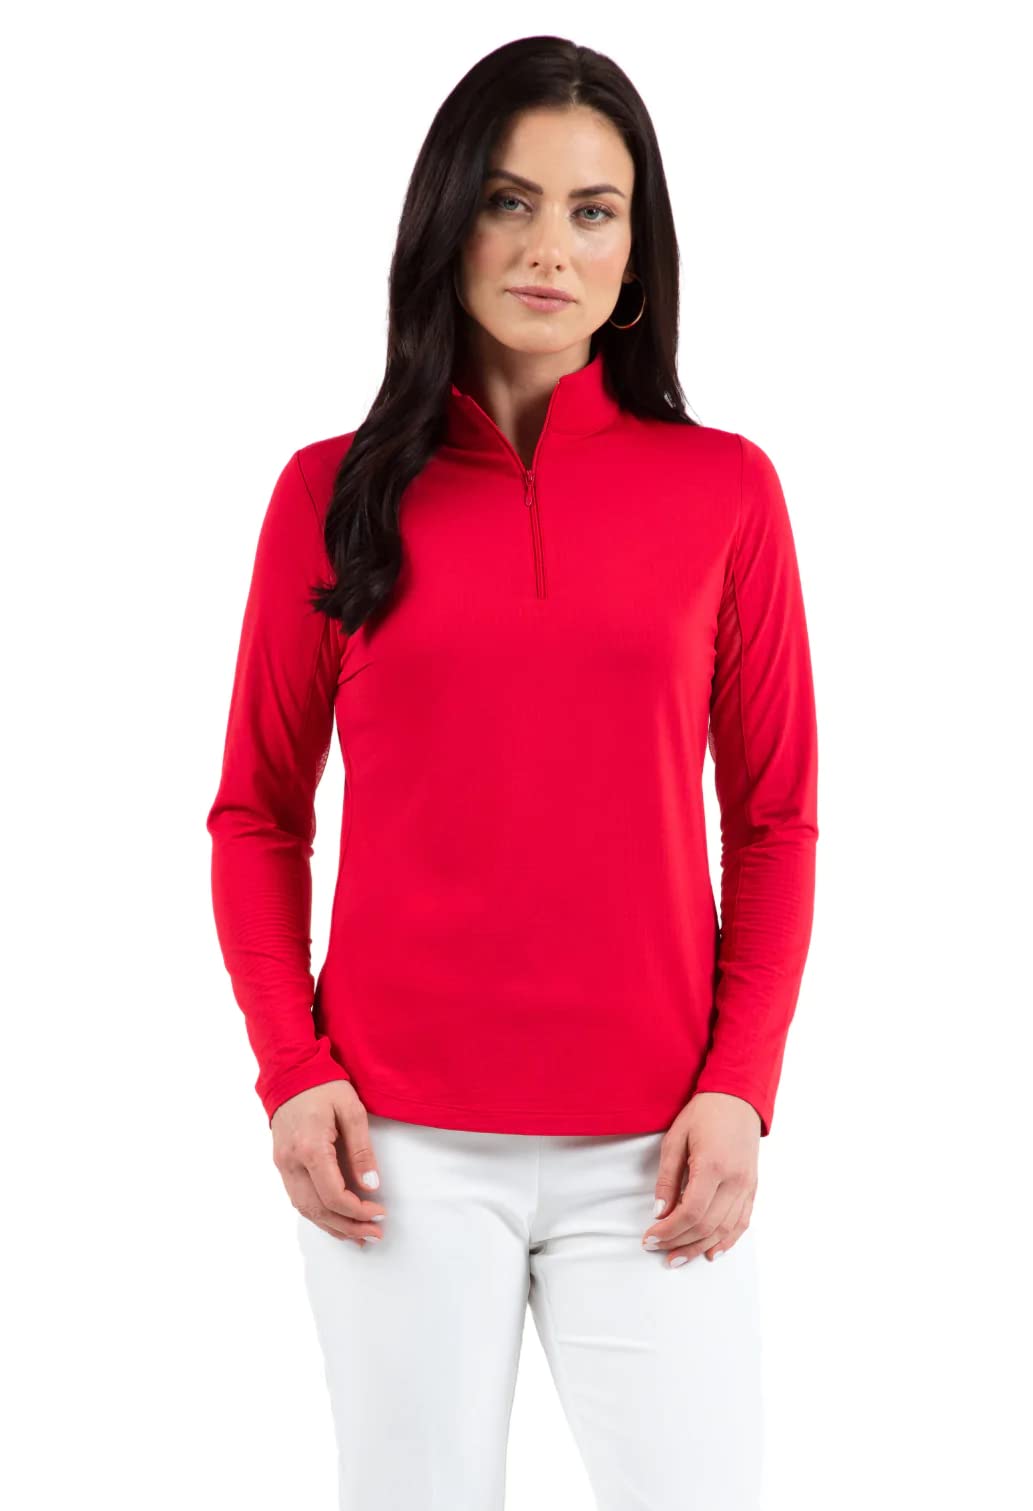 IBKUL Athleisure Wear Sun Protective UPF 50+ Icefil Cooling Tech Long Sleeve Mock Neck Top with Under Arm Mesh 80000 Red Solid XS